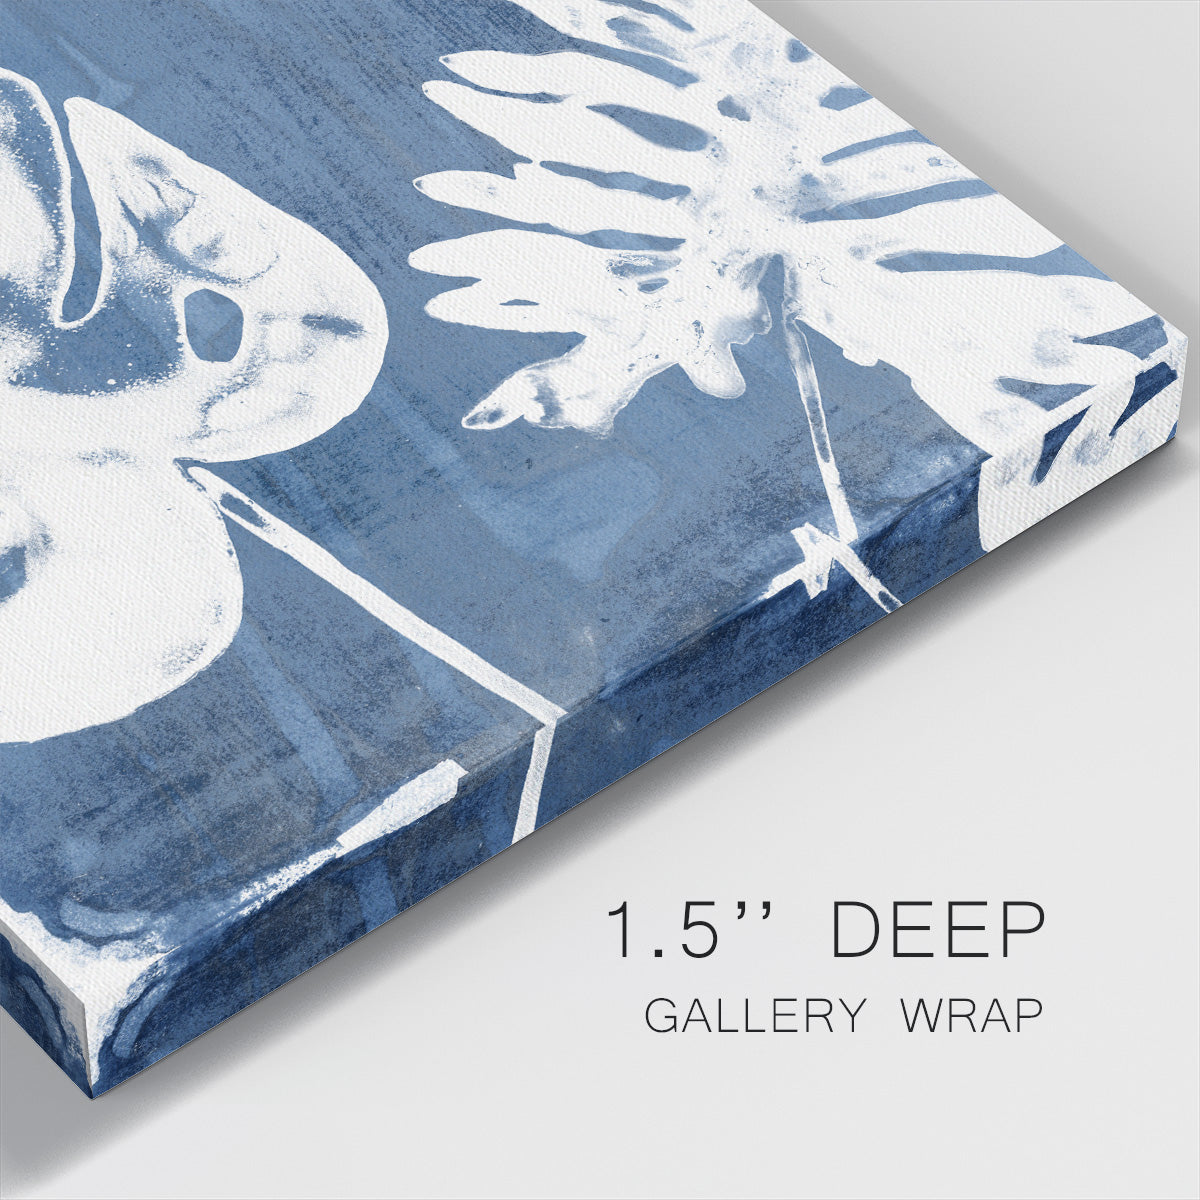 Tropical Indigo Impressions I-Premium Gallery Wrapped Canvas - Ready to Hang